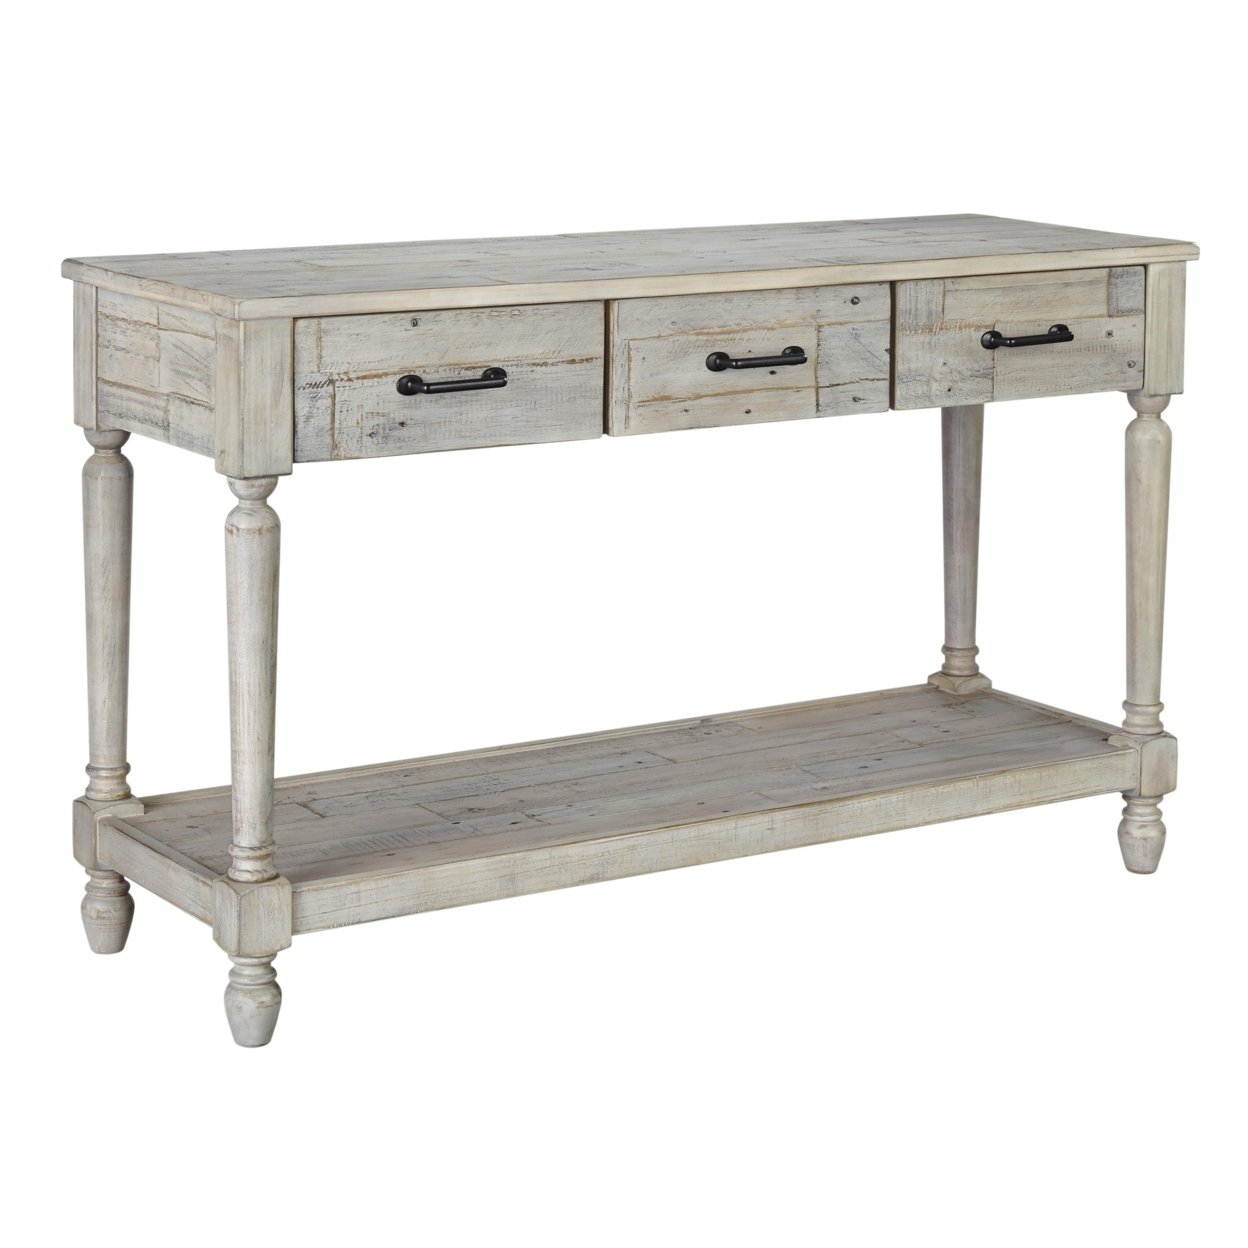 Wooden Frame Sofa Table With 3 Drawers And 1 Bottom Shelf, Washed White- Saltoro Sherpi